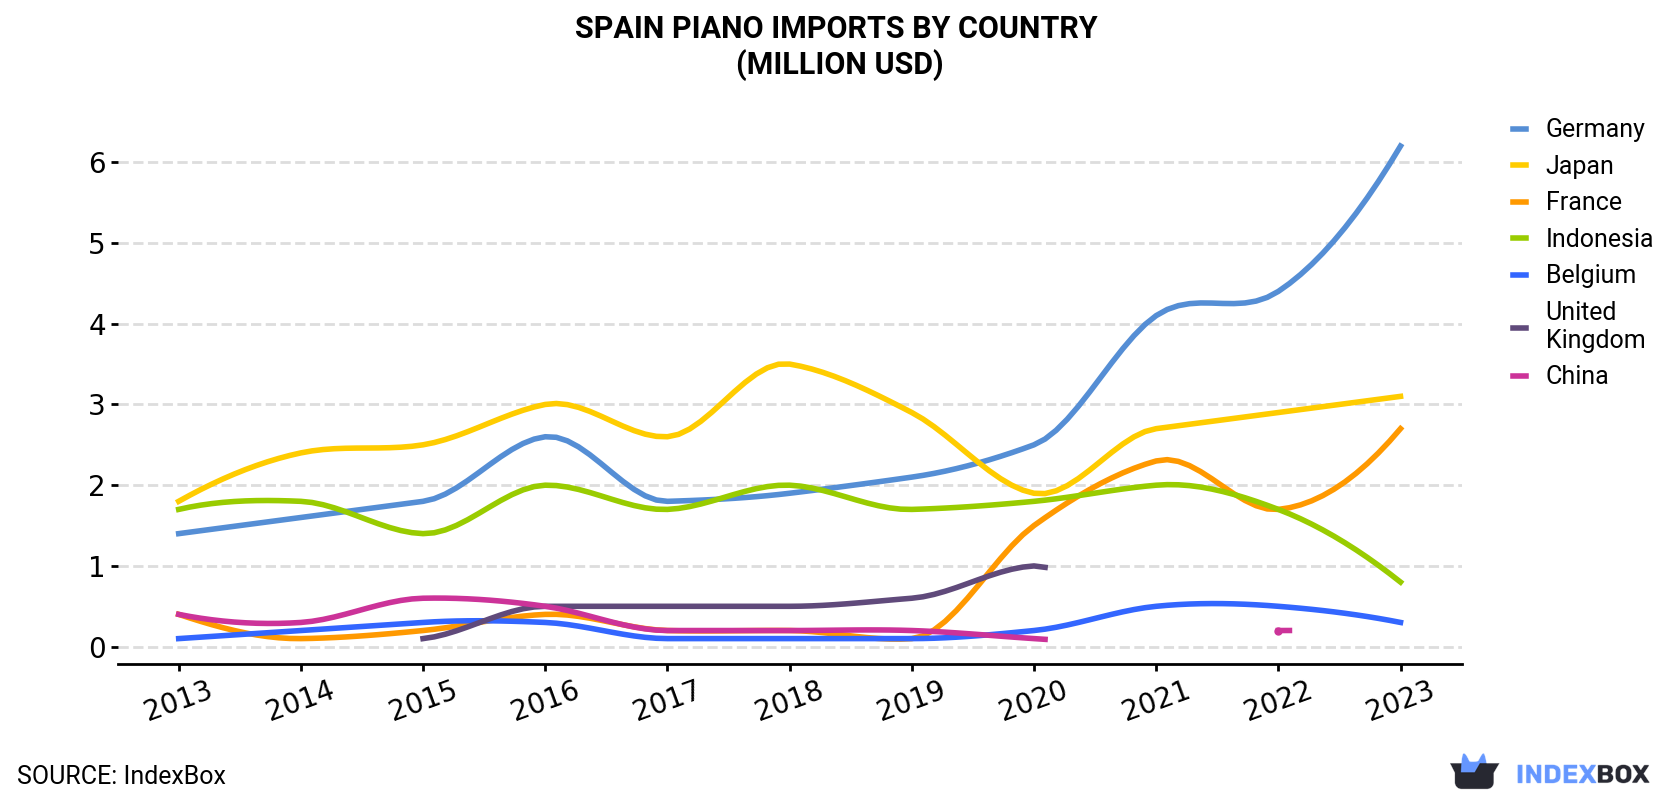 Spain Piano Imports By Country (Million USD)